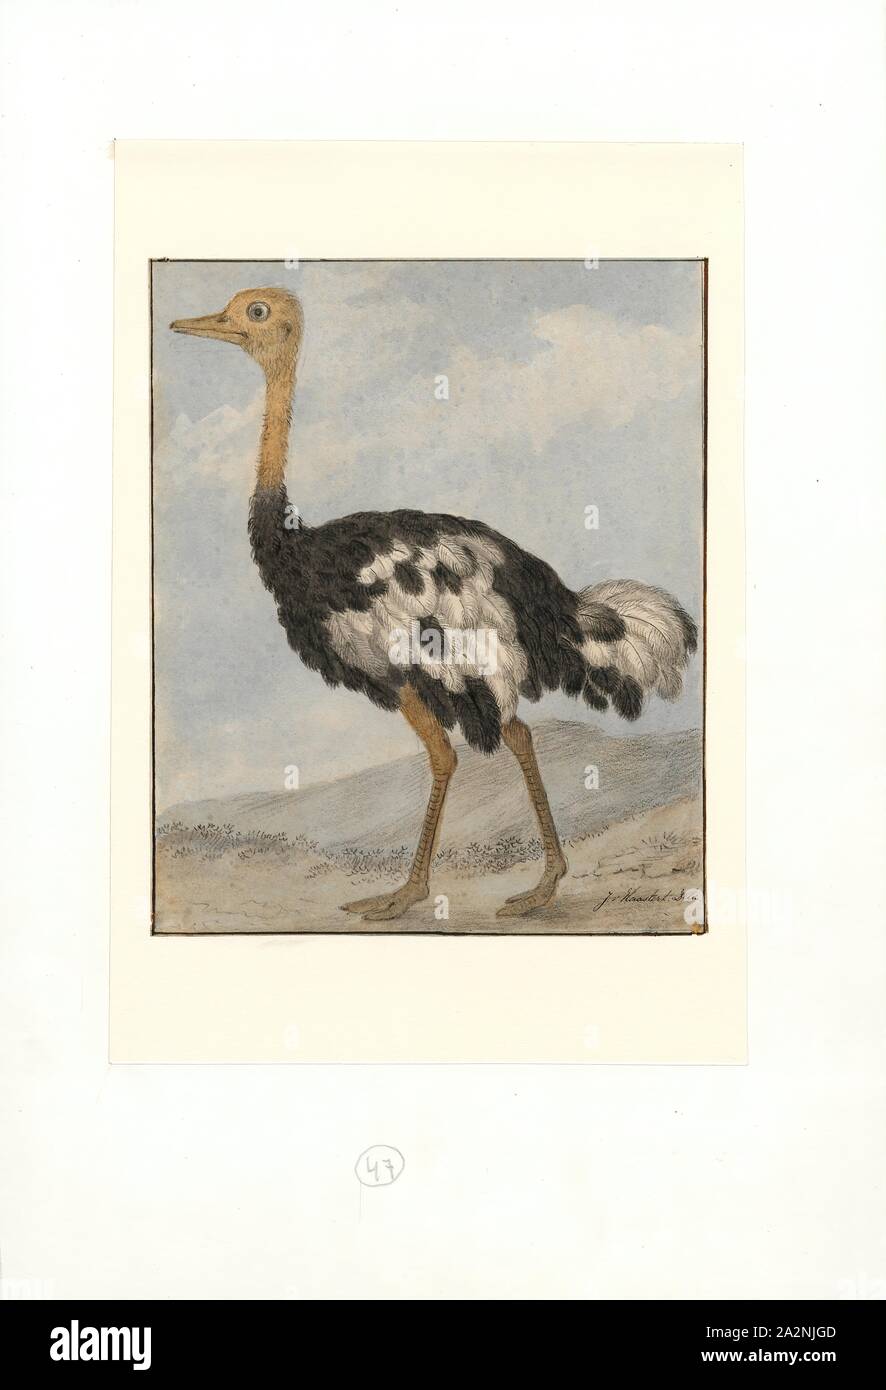 Struthio camelus, Print, The common ostrich (Struthio camelus), or simply ostrich, is a species of large flightless bird native to certain large areas of Africa. It is one of two extant species of ostriches, the only living members of the genus Struthio in the ratite order of birds. The other is the Somali ostrich (Struthio molybdophanes), which was recognized as a distinct species by BirdLife International in 2014 having been previously considered a very distinctive subspecies of ostrich., 1753-1834 Stock Photo